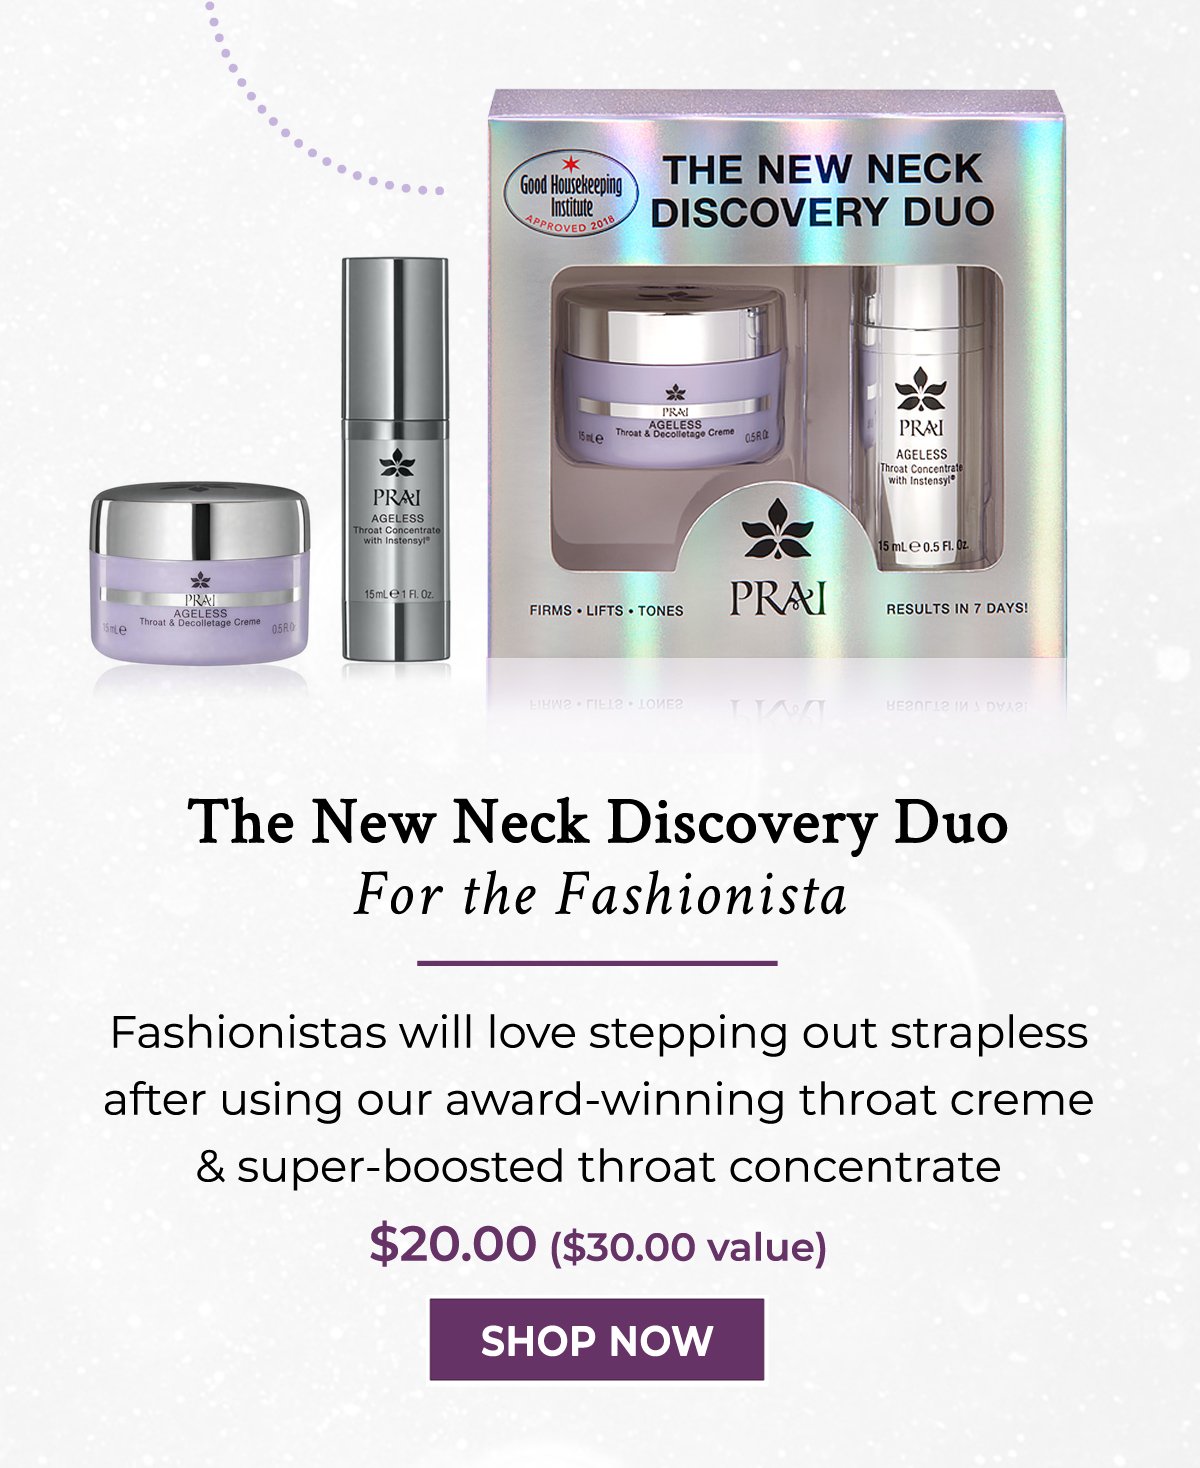 The New Neck Discovery Duo - For the Fashionista 